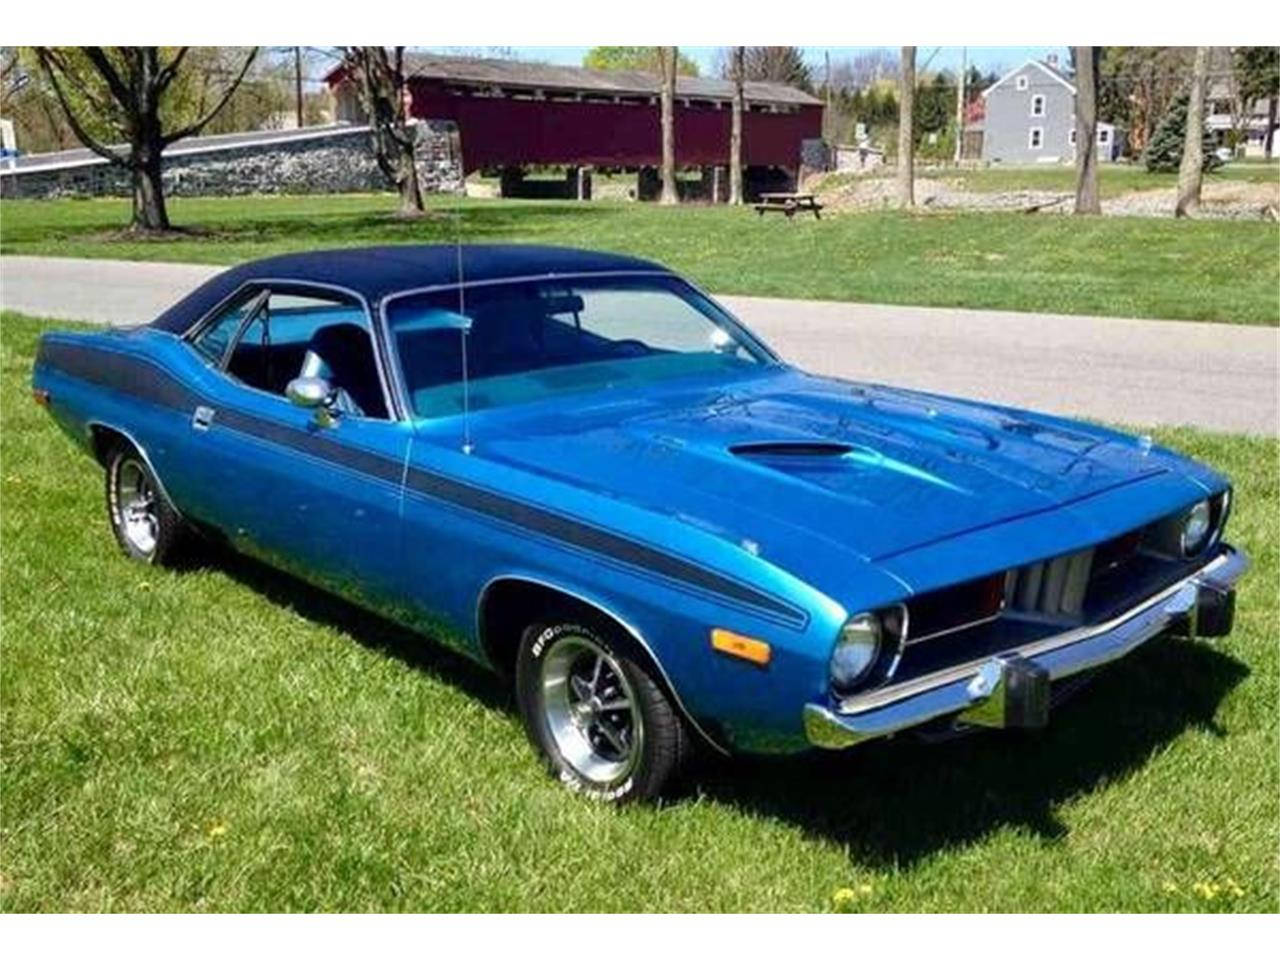 Blue Vintage Plymouth Barracuda On Grass